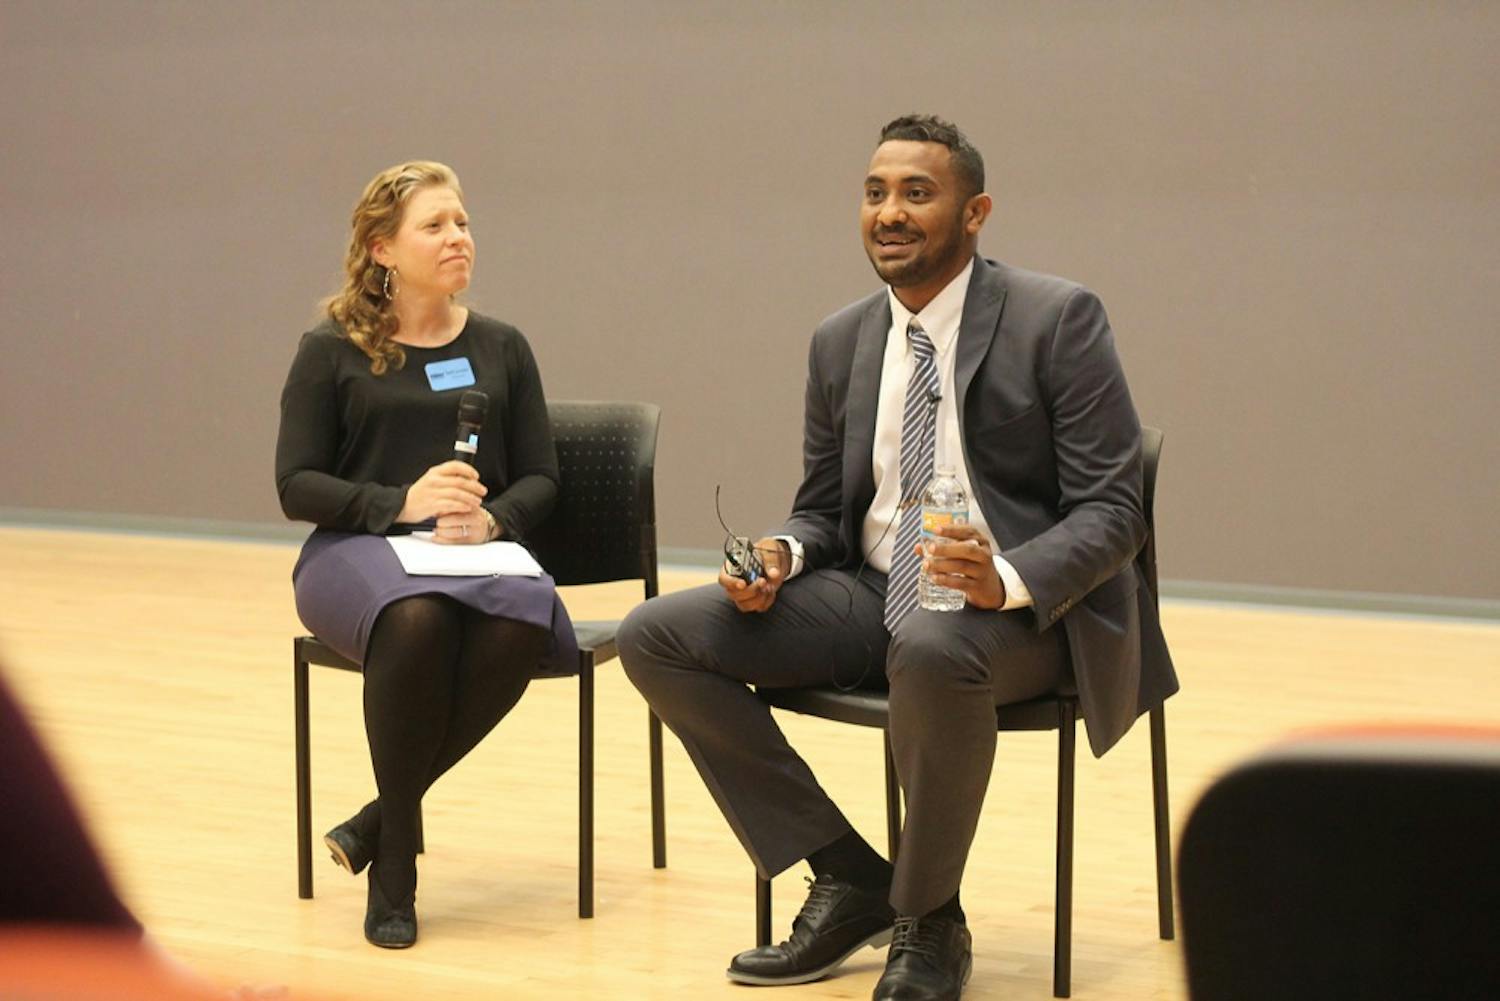 Mohamed Abubakr, a civil and human rights activist from Sudan, discusses his life experiences that led to his service in the nonprofit sector and refugee challenges throughout Africa.